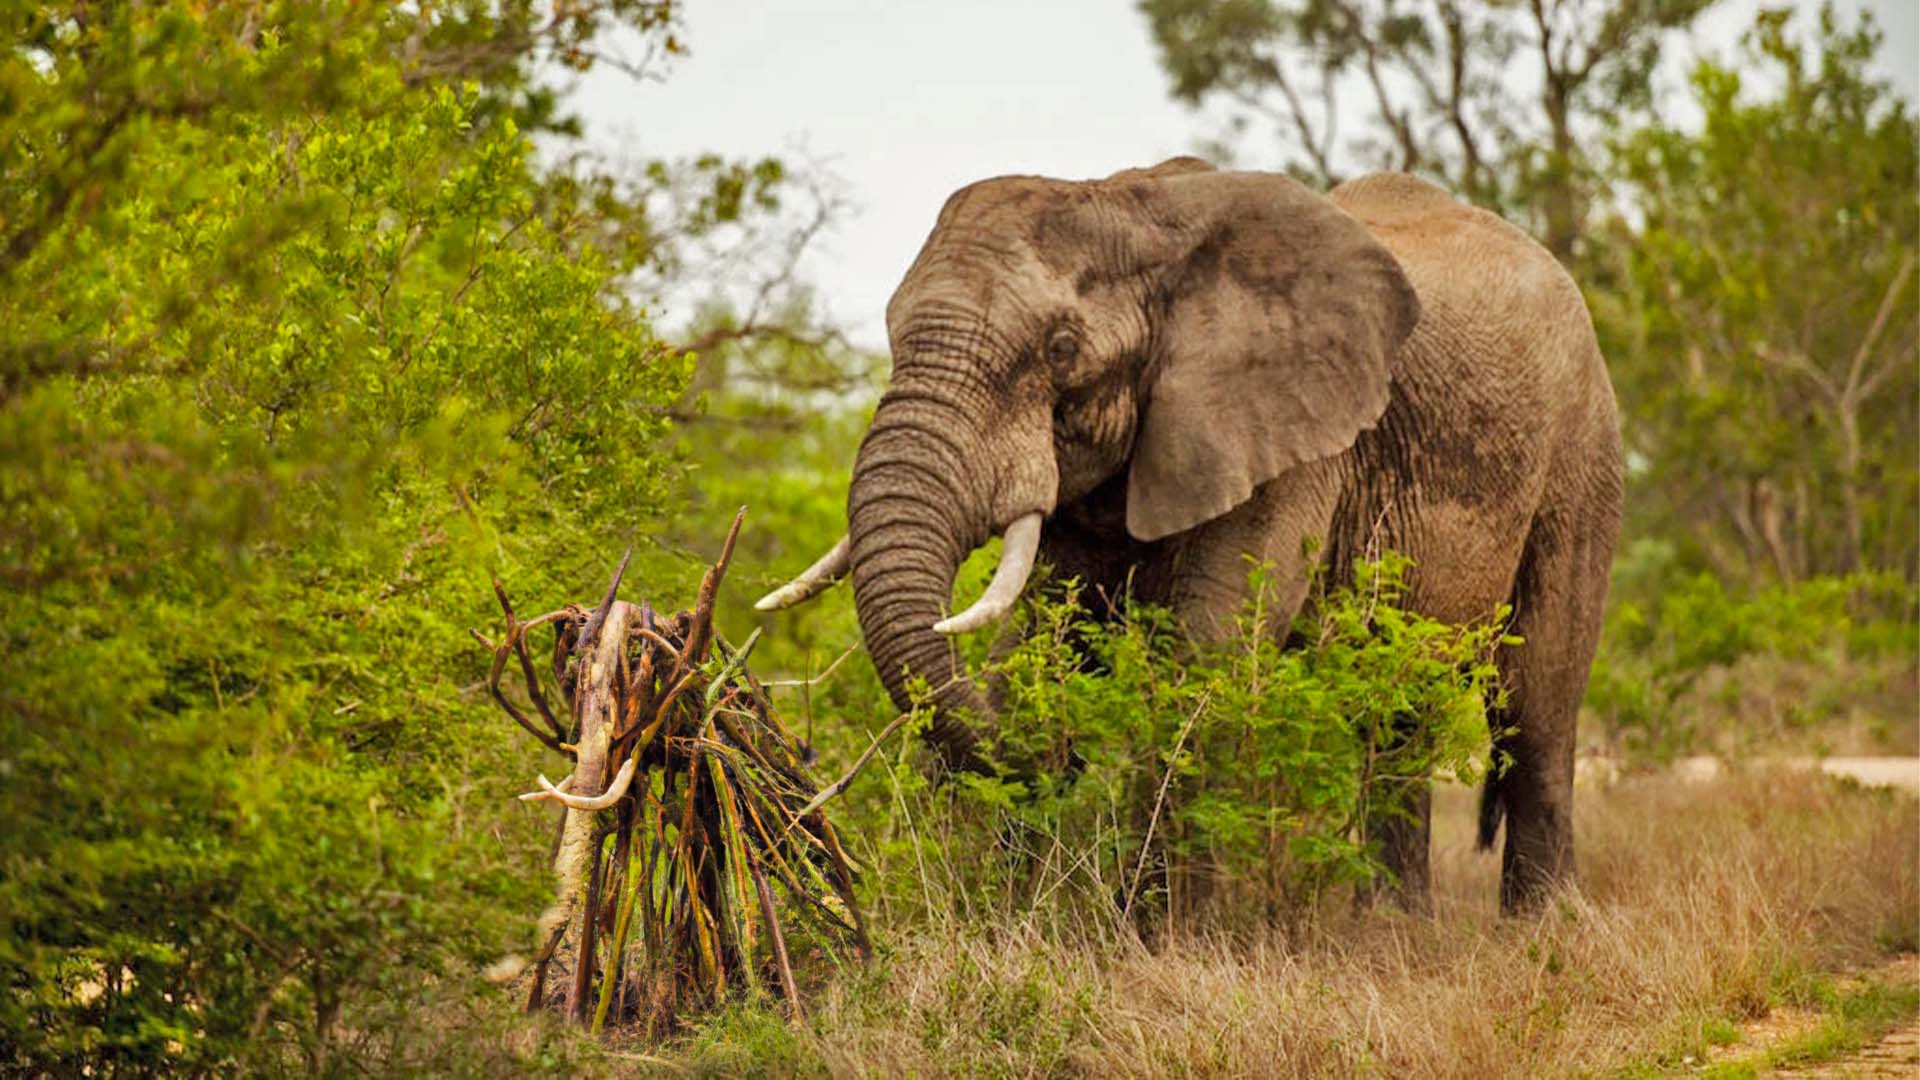 Grieving Elephant Builds her Baby Elephant out of Sticks